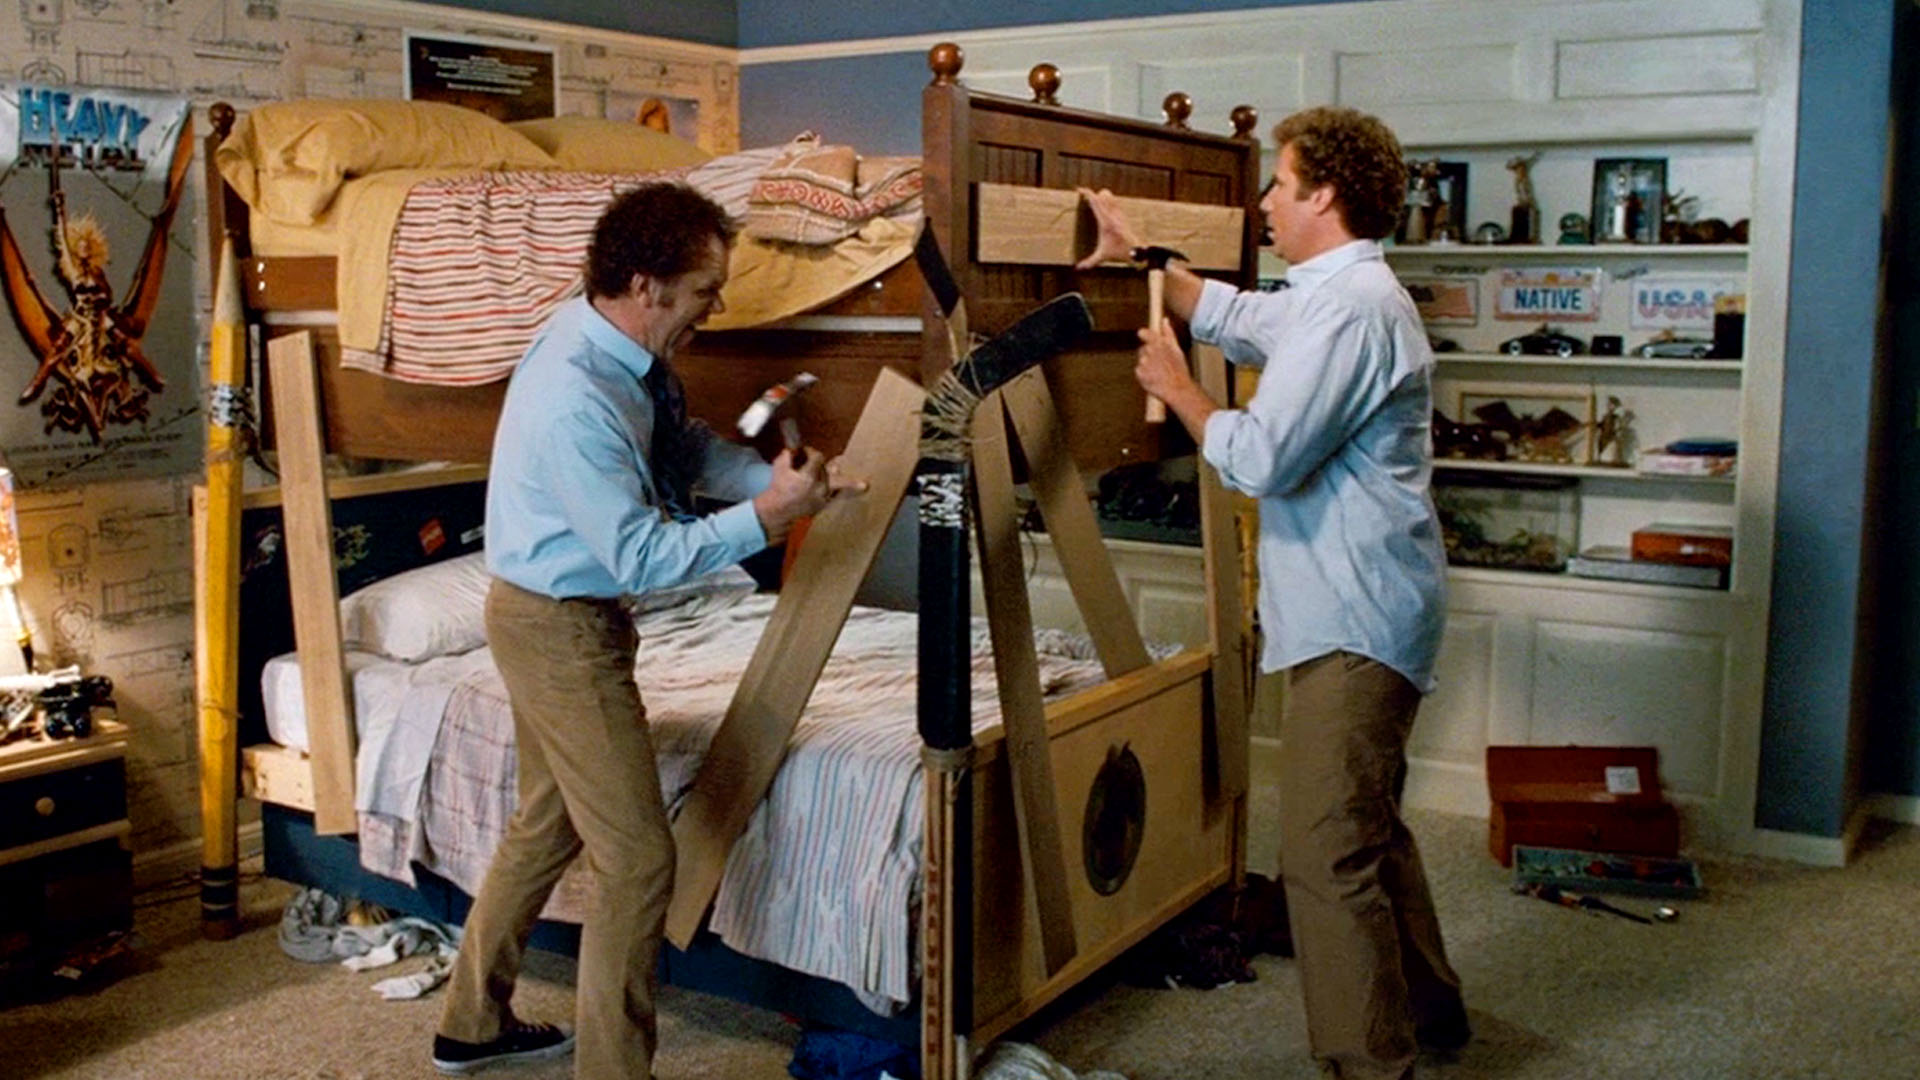 Brothers bedroom. Step brothers 2008. Step brother 2. Bunk brothers. Step brothers 2016.